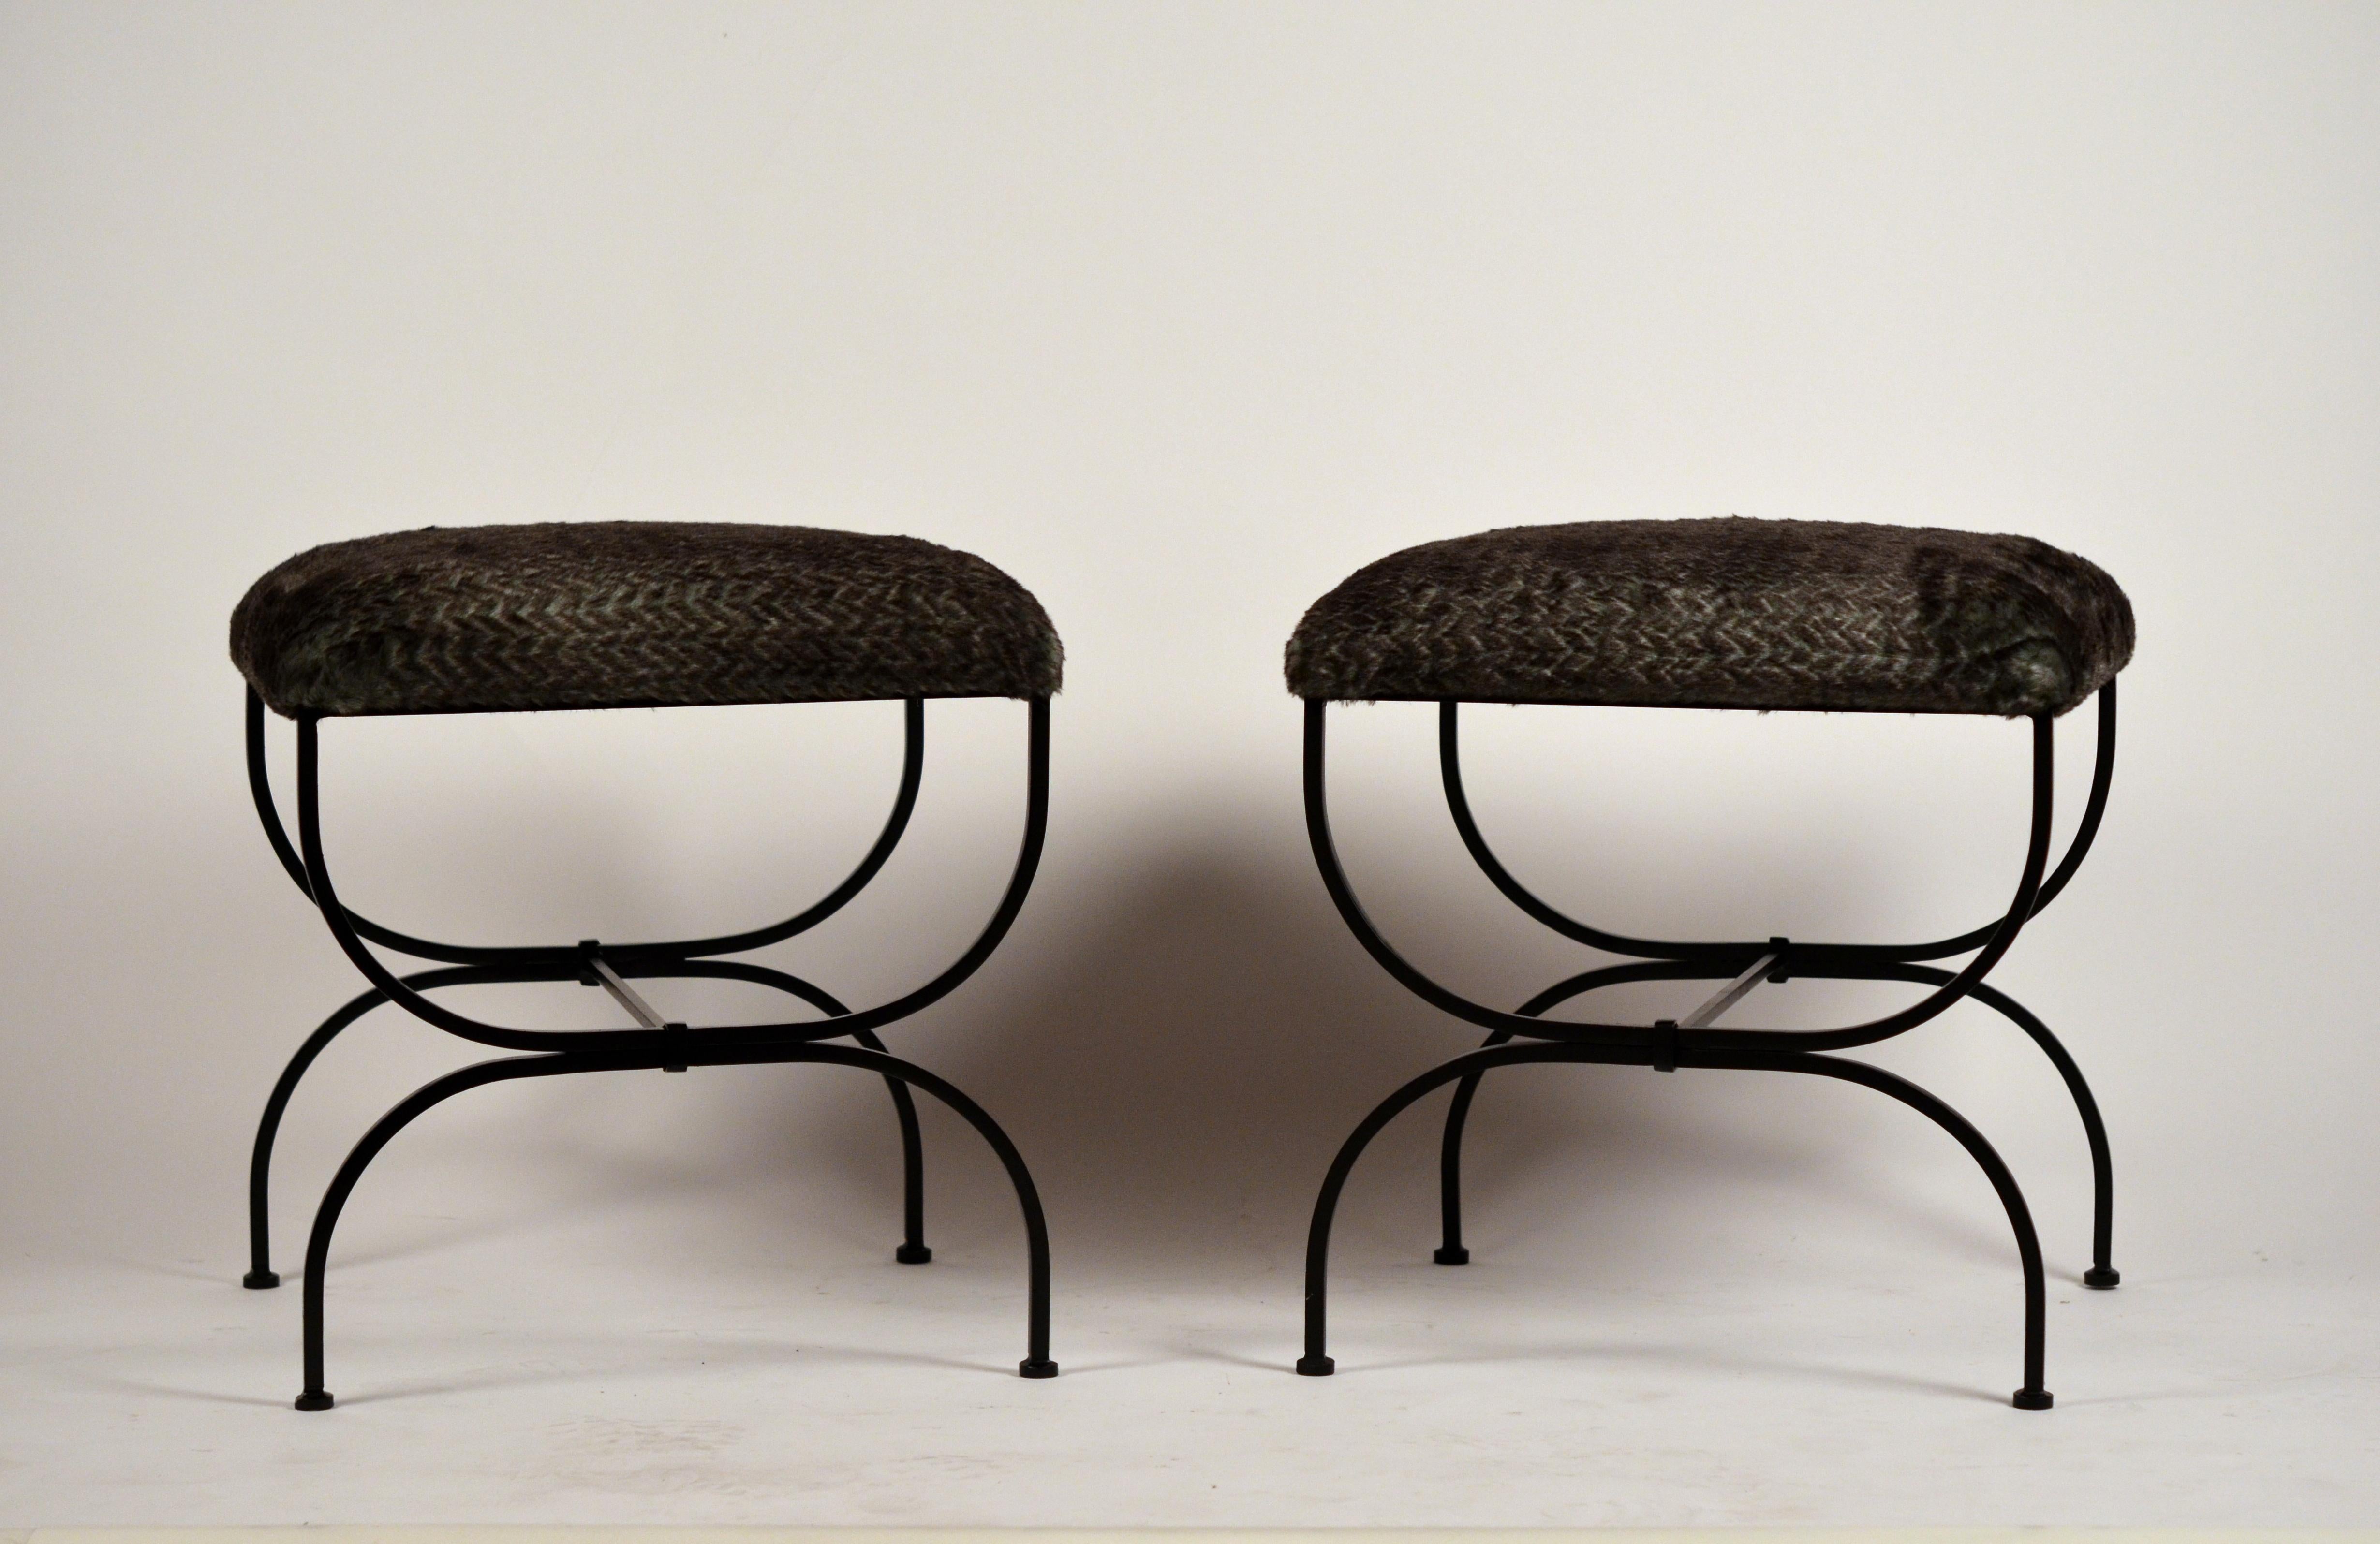 Pair of large faux fur 'Strapontin' stools by Design Frères.

Environmentally conscious design.